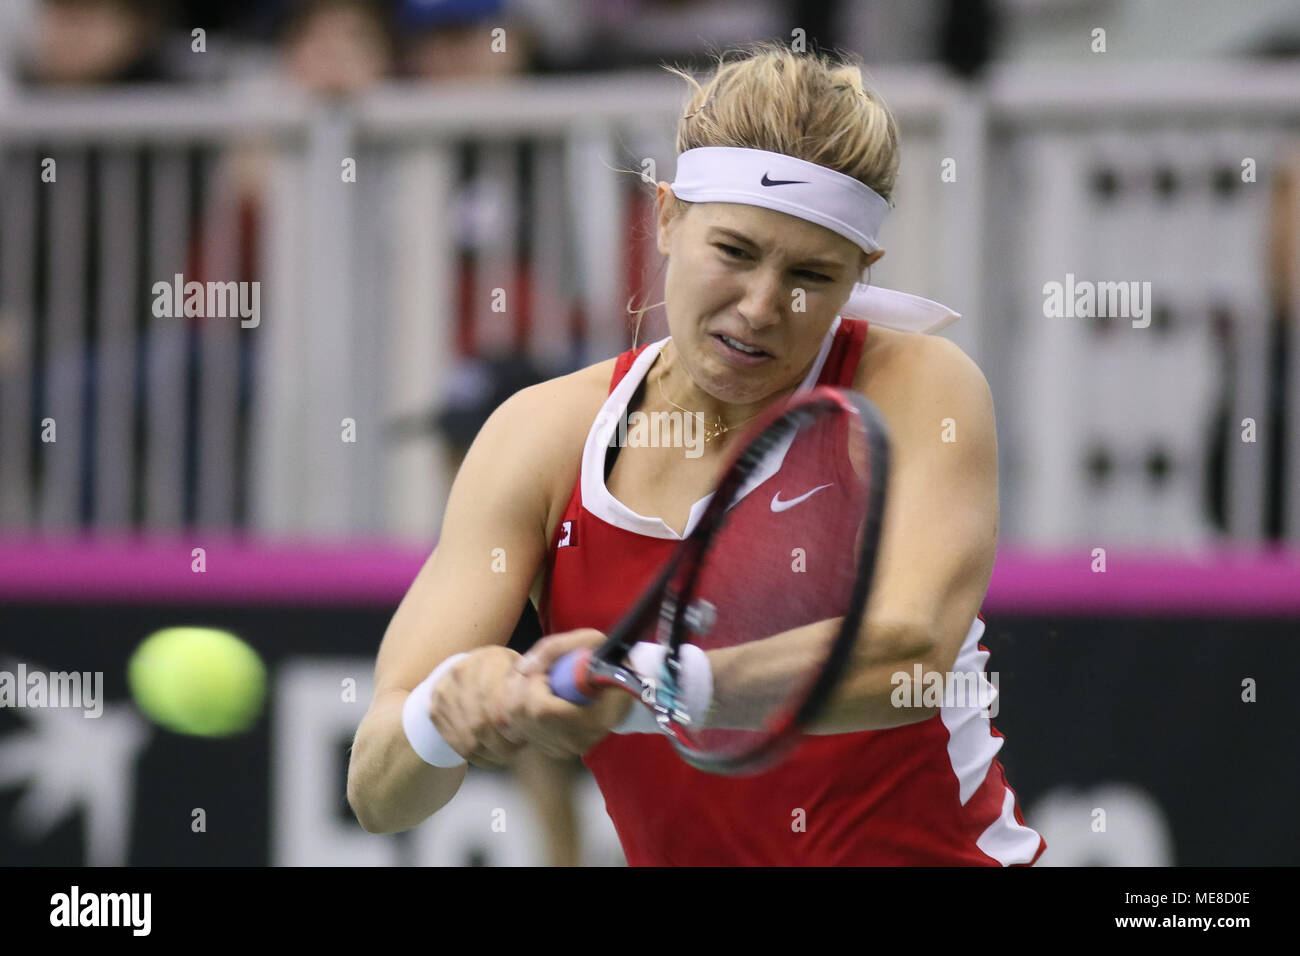 Montreal, Canada, 21 April 2018. Eugenie Bouchard of Canada hits a return against Kateryna Bondarenko of the Ukraine during their Fed Cup World Group II play-off tennis match in Montreal, Quebec, Canada on Saturday, April 21, 2018. Credit: Dario Ayala/Alamy Live News Stock Photo